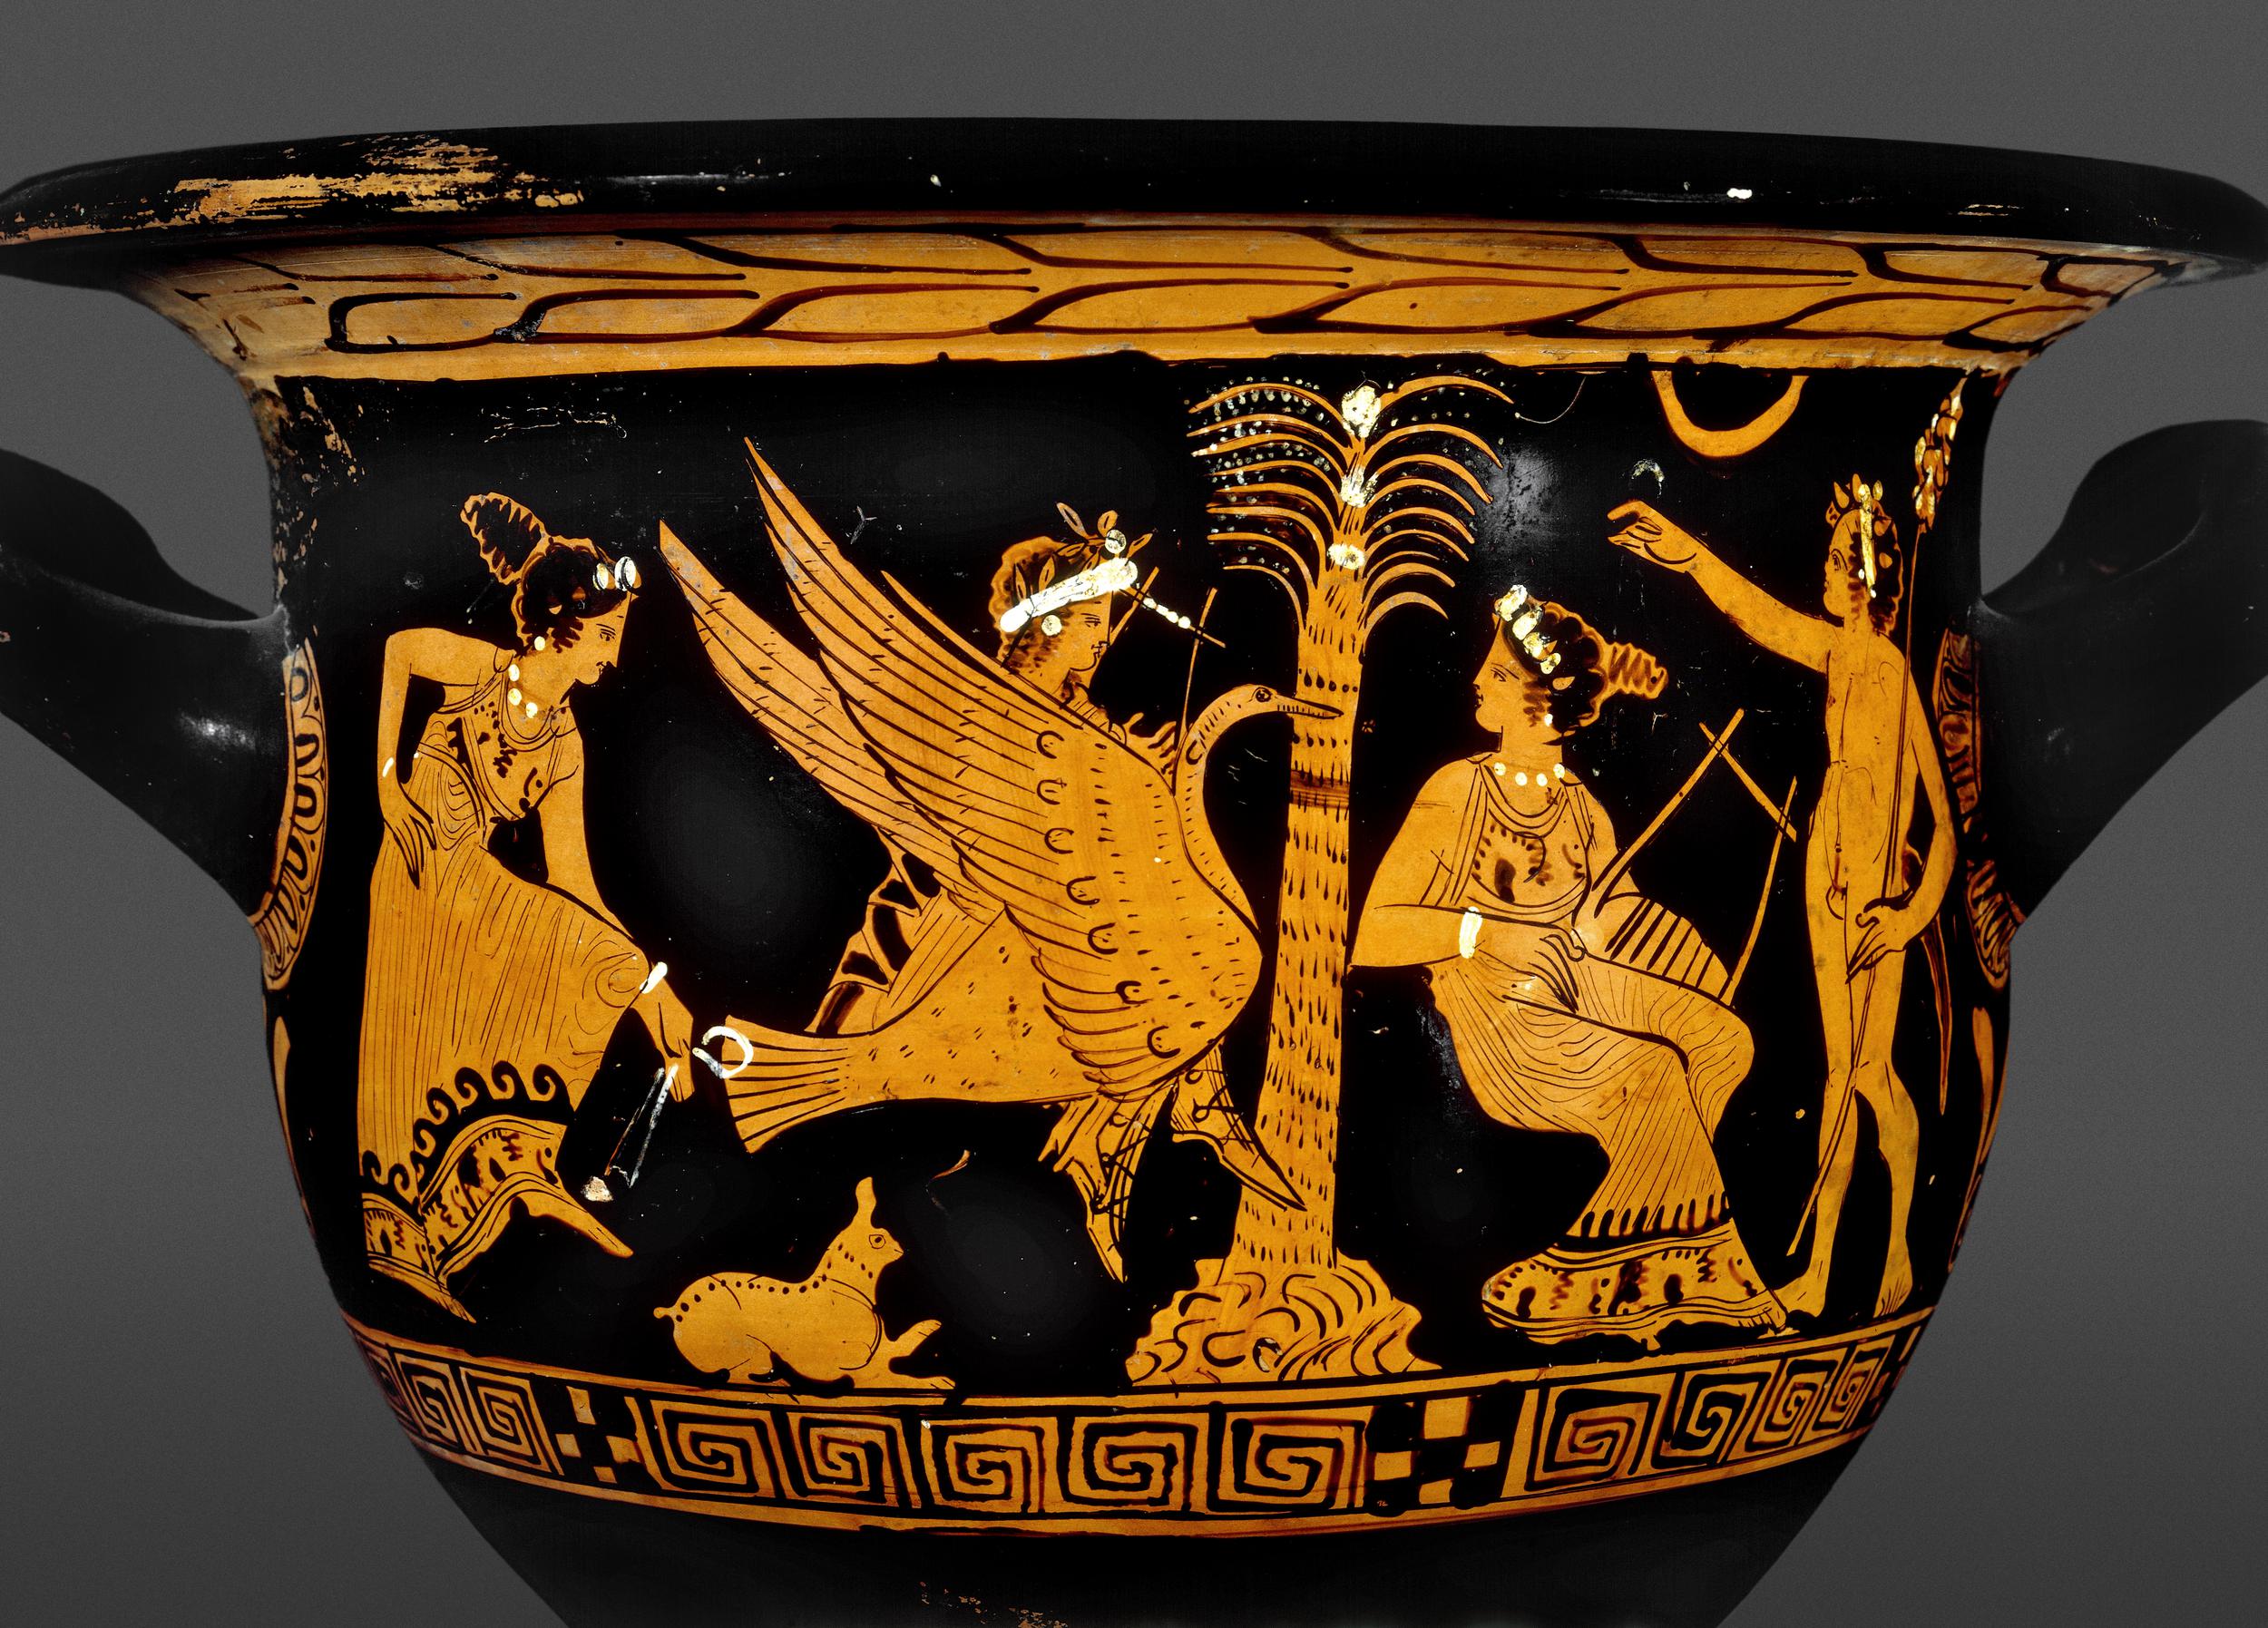 Apollo rides a flying swan. On either side of him are women, one dancing and one playing music under a tree. A satyr stands to the side holding a staff.